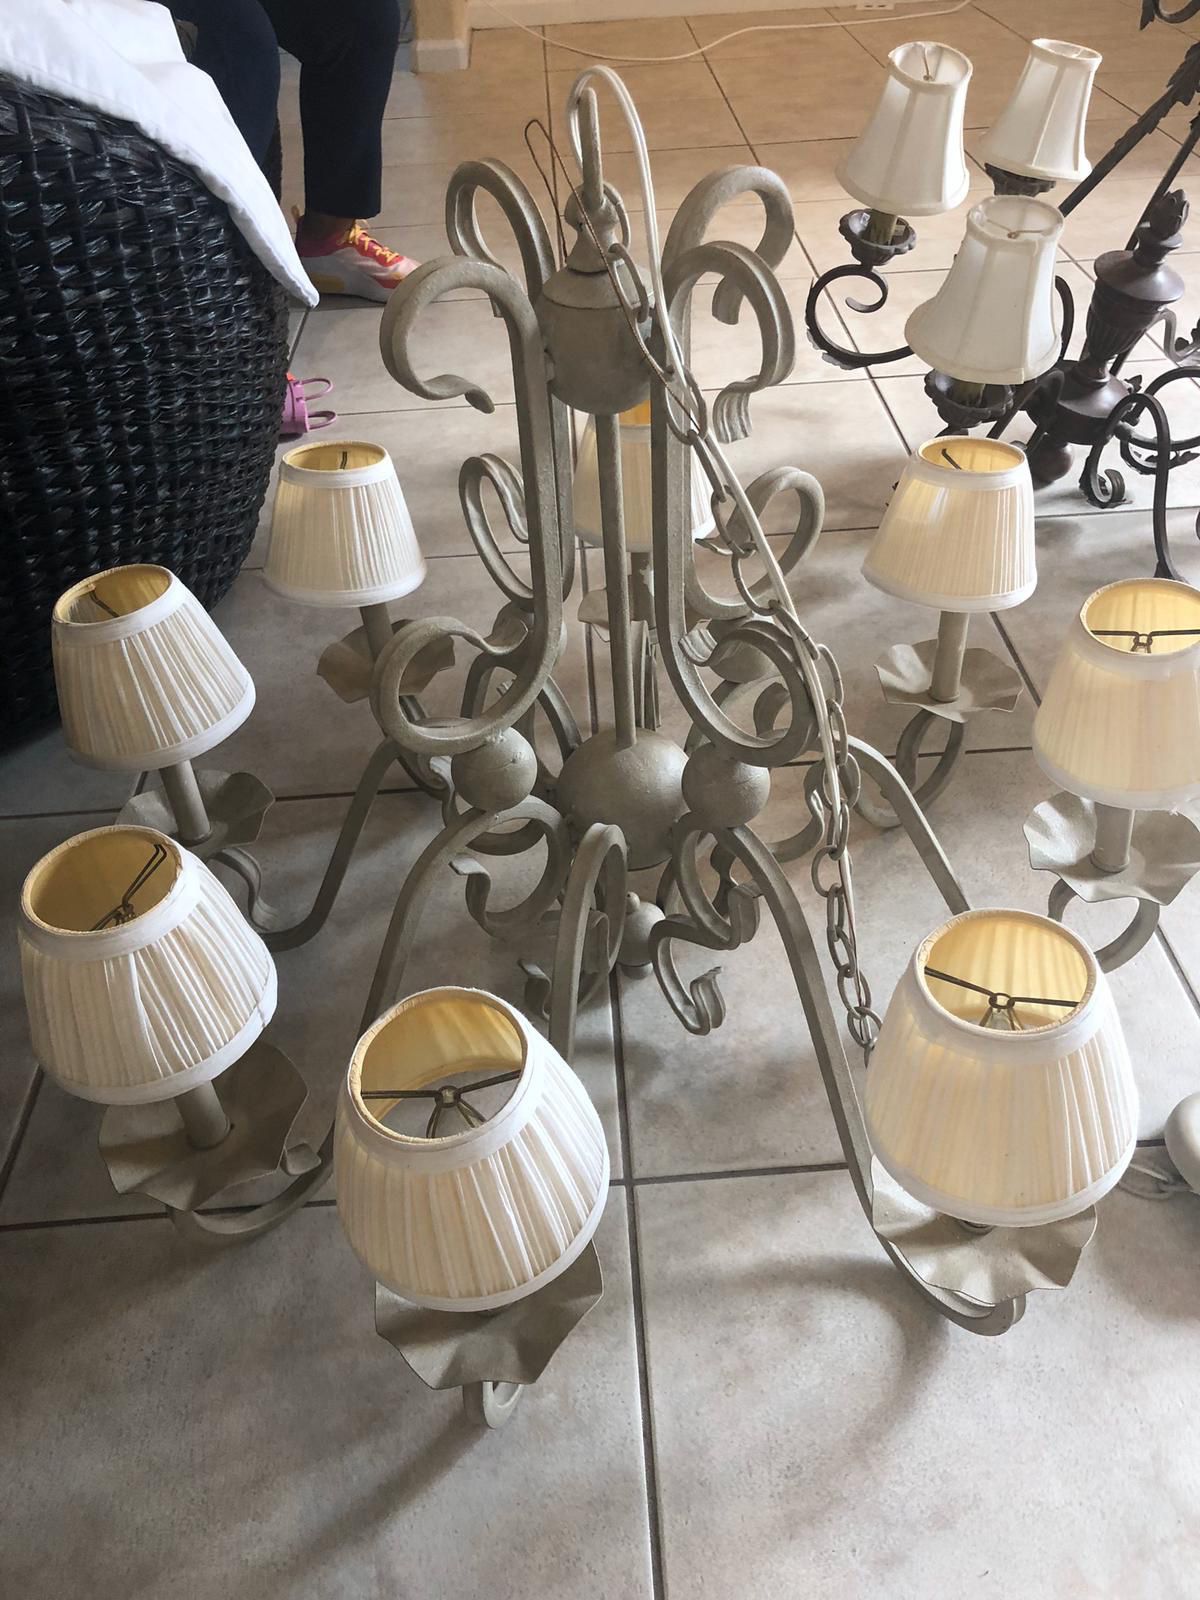 Chandeliers and lamps all for $30